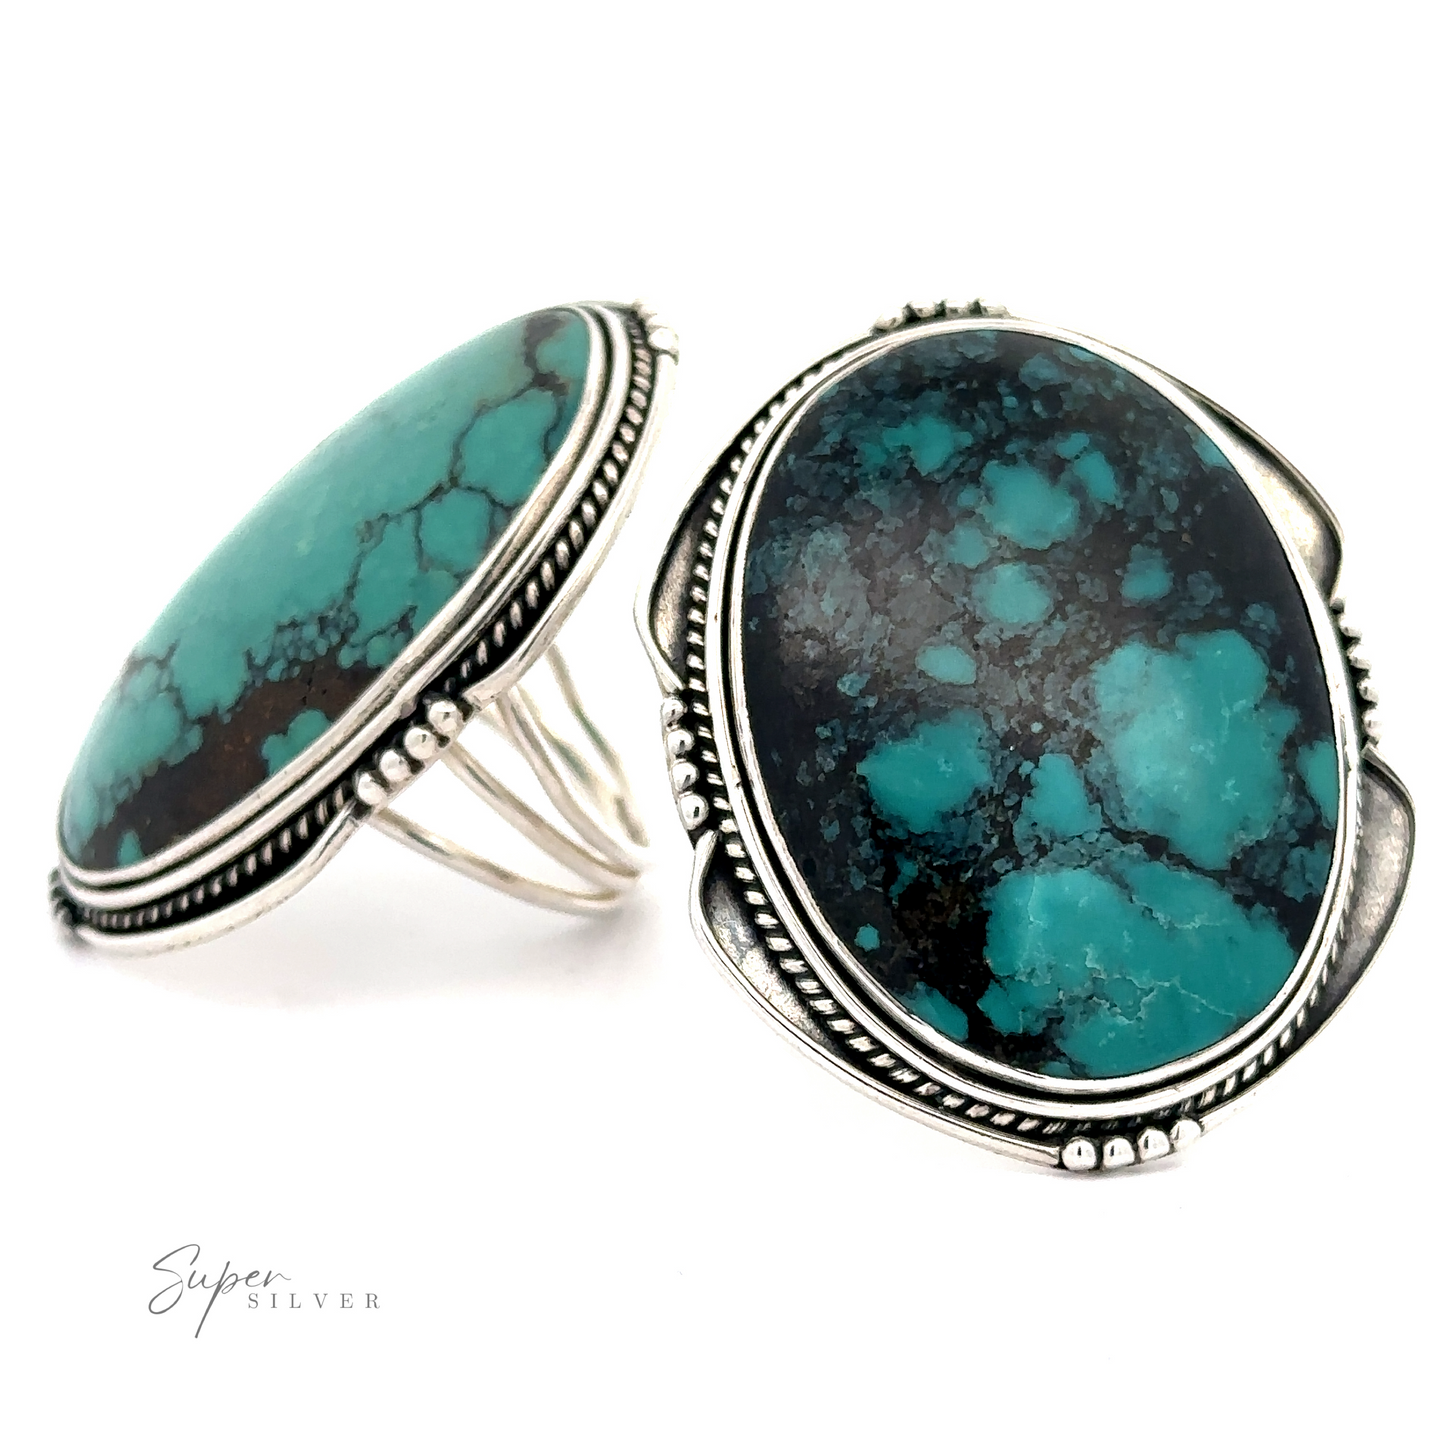 Two Oval Natural Turquoise Rings With Rope And Ball Border with intricate sterling silver band designs are displayed against a white background. The logo "Super Silver" appears in the bottom left corner, emphasizing their elegant design and natural beauty.